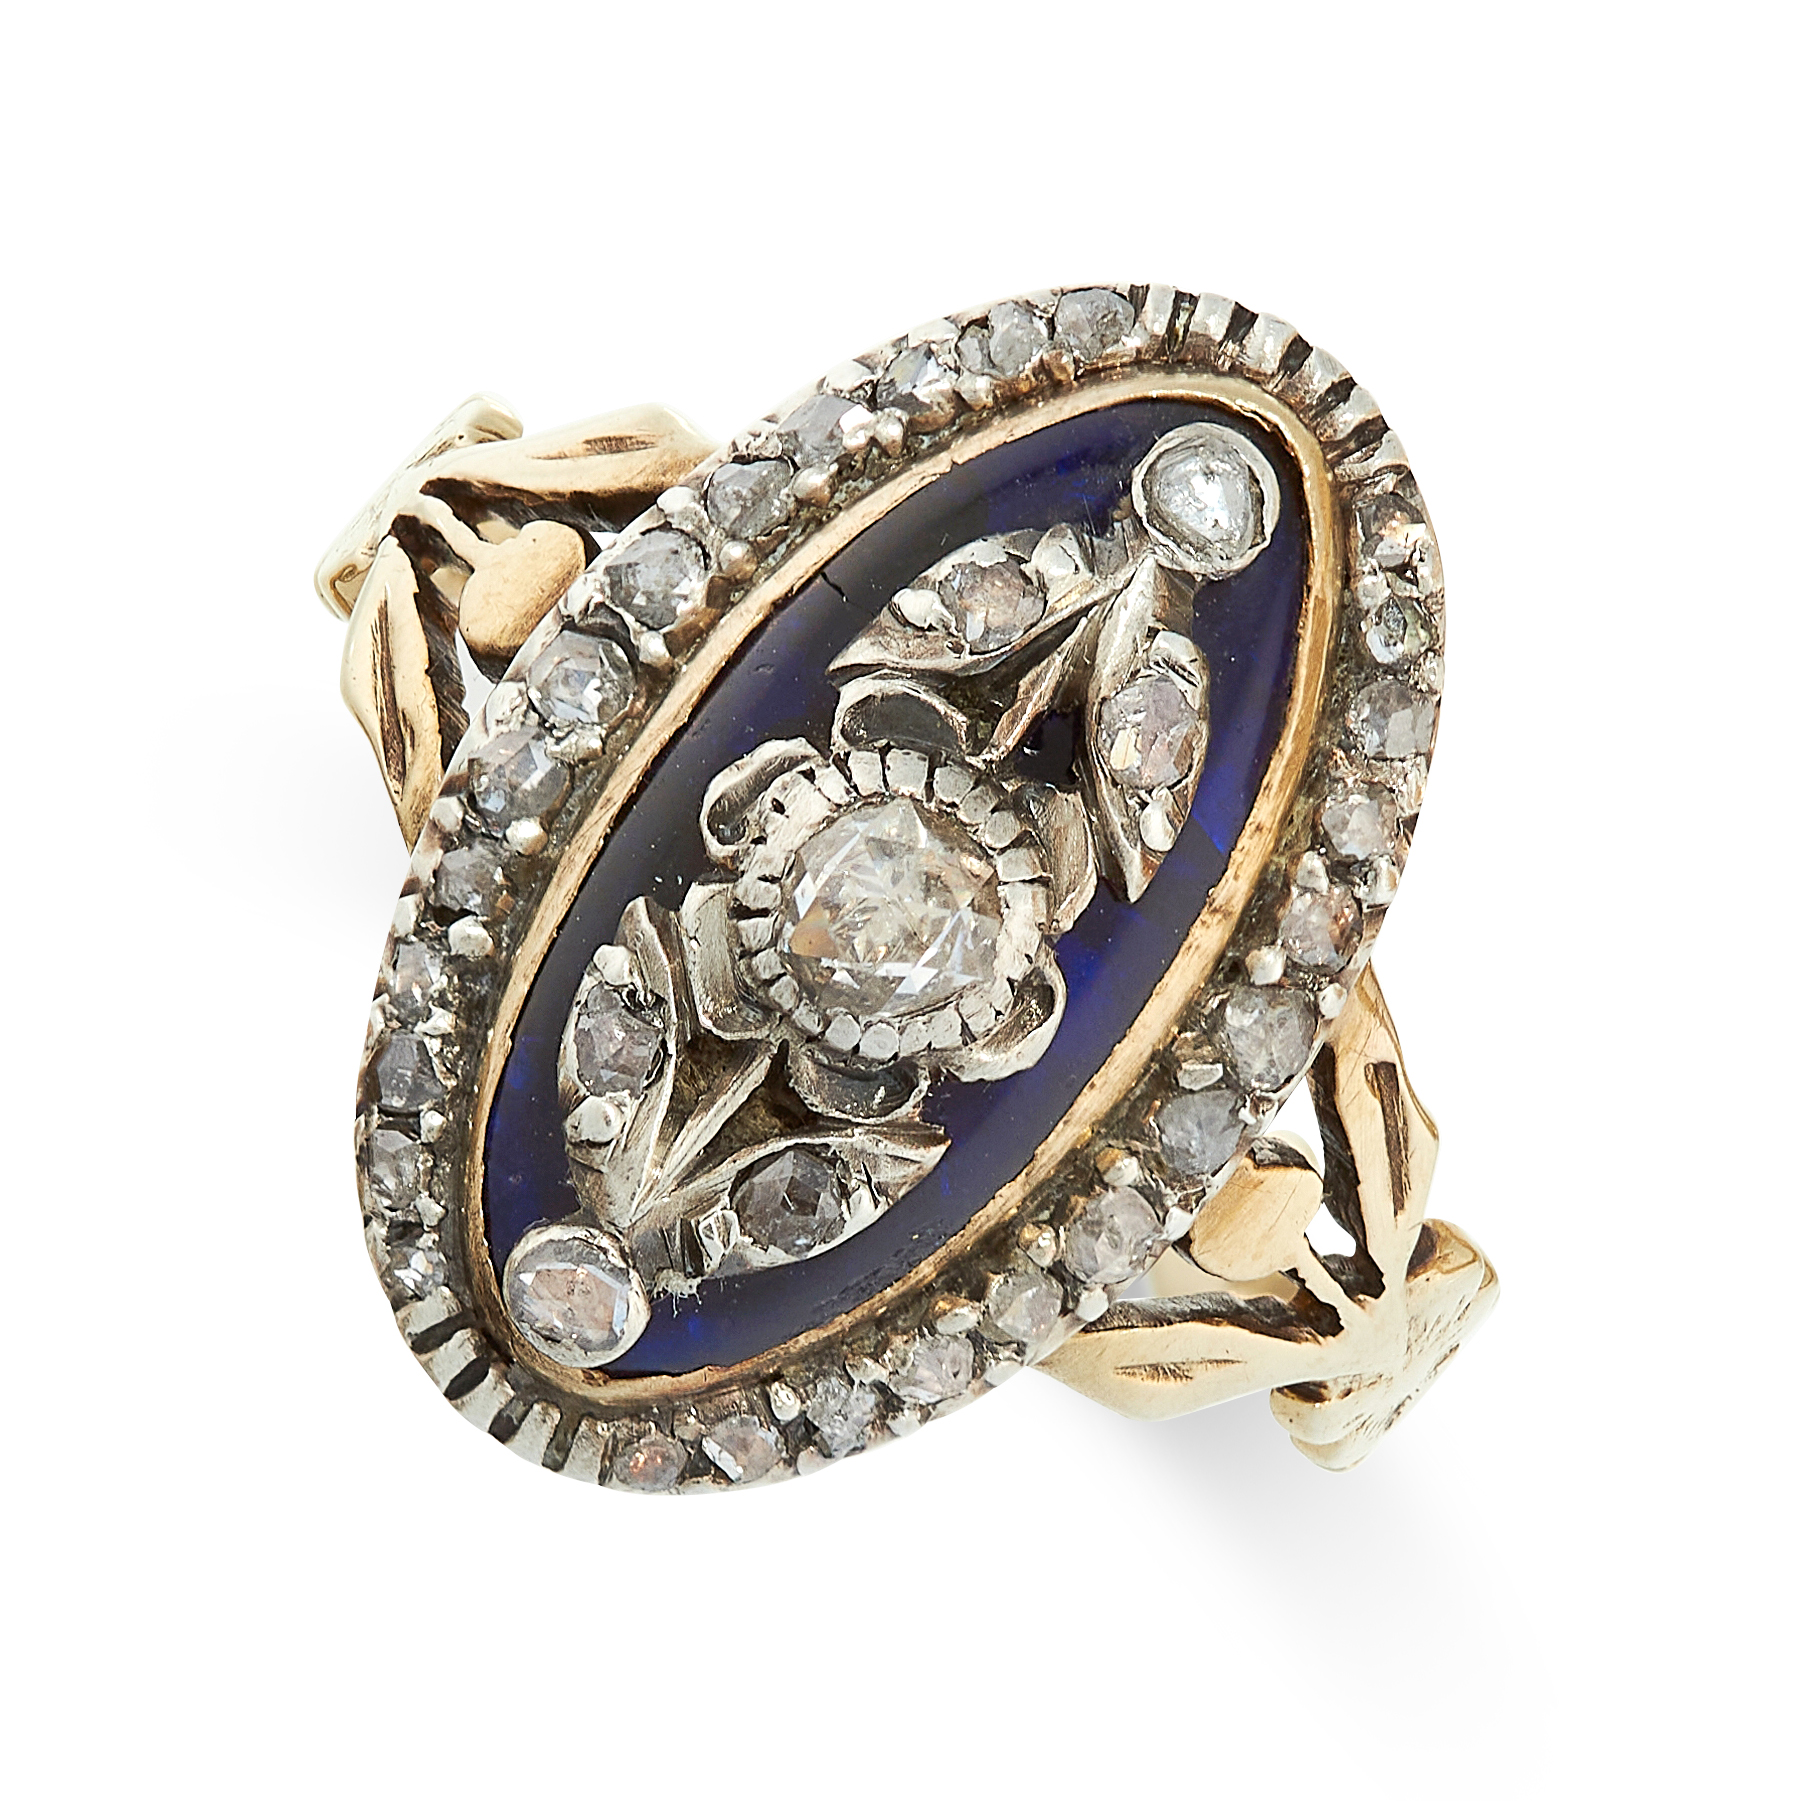 ANTIQUE DIAMOND AND BLUE GLASS BAGUE DE FIRMAMENT RING in yellow gold and silver, the oval face